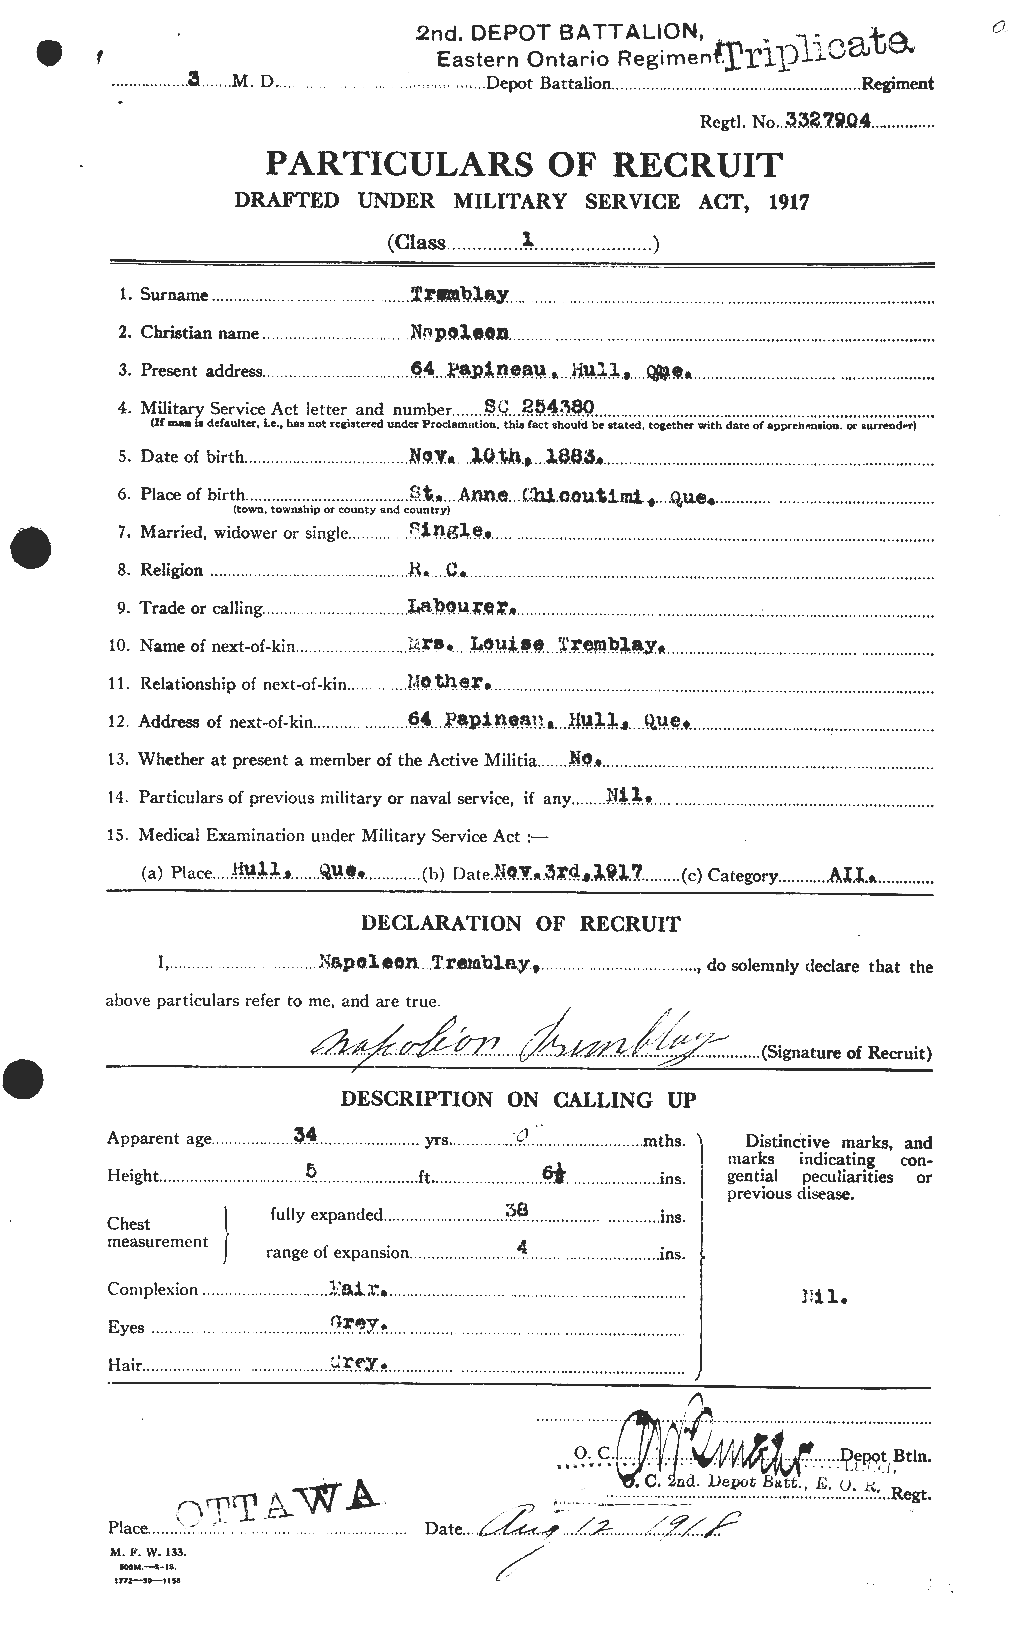 Personnel Records of the First World War - CEF 639205a